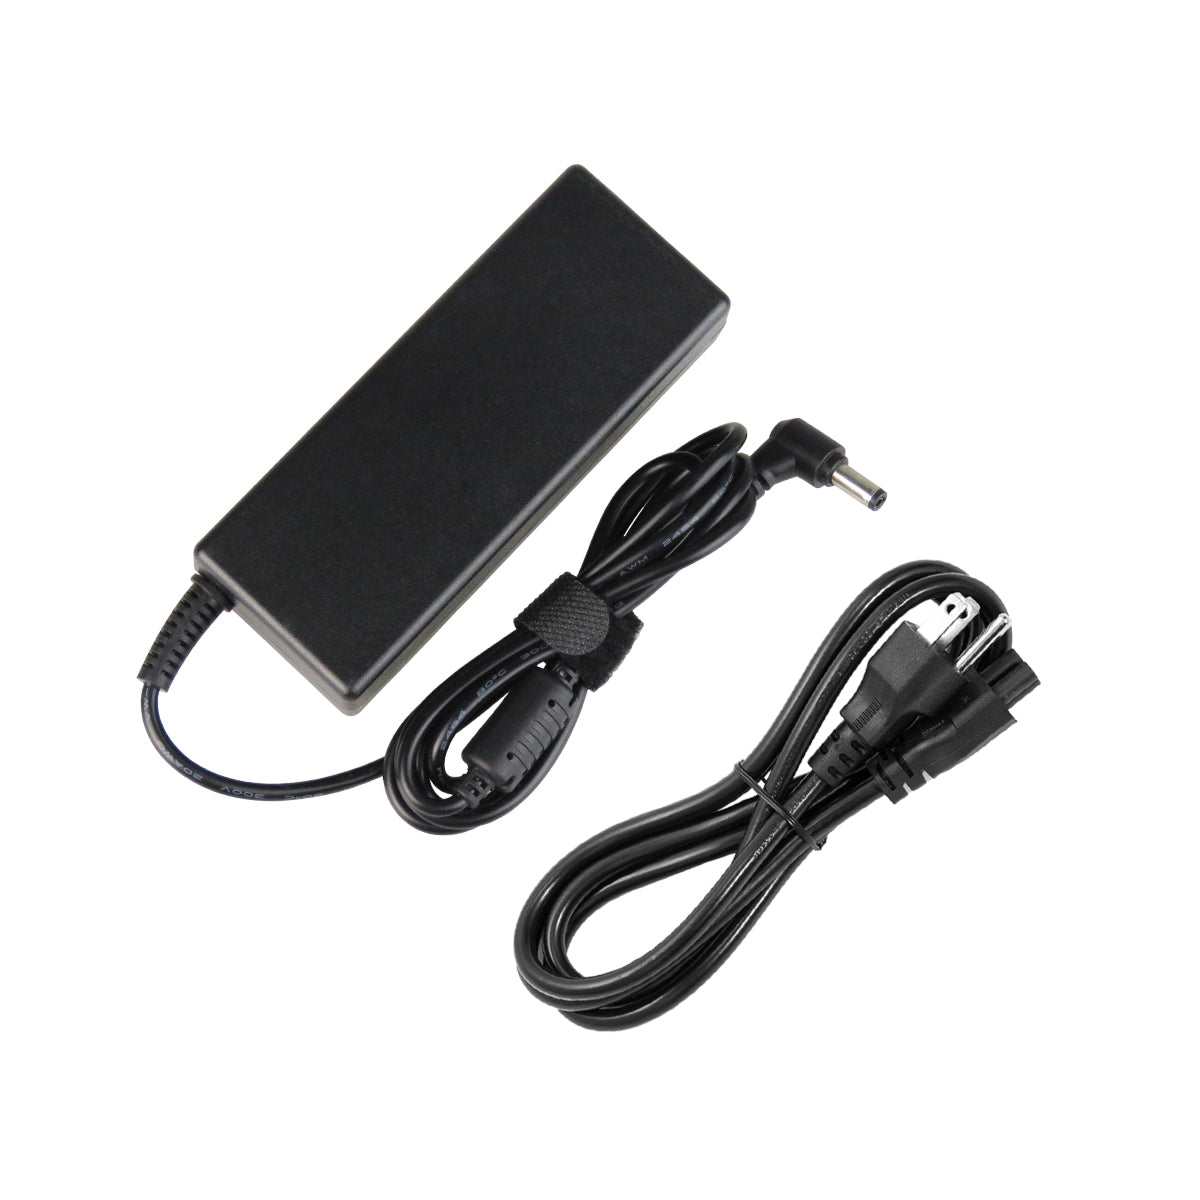 AC Adapter Charger for ASUS X54C-BBK3 Notebook.